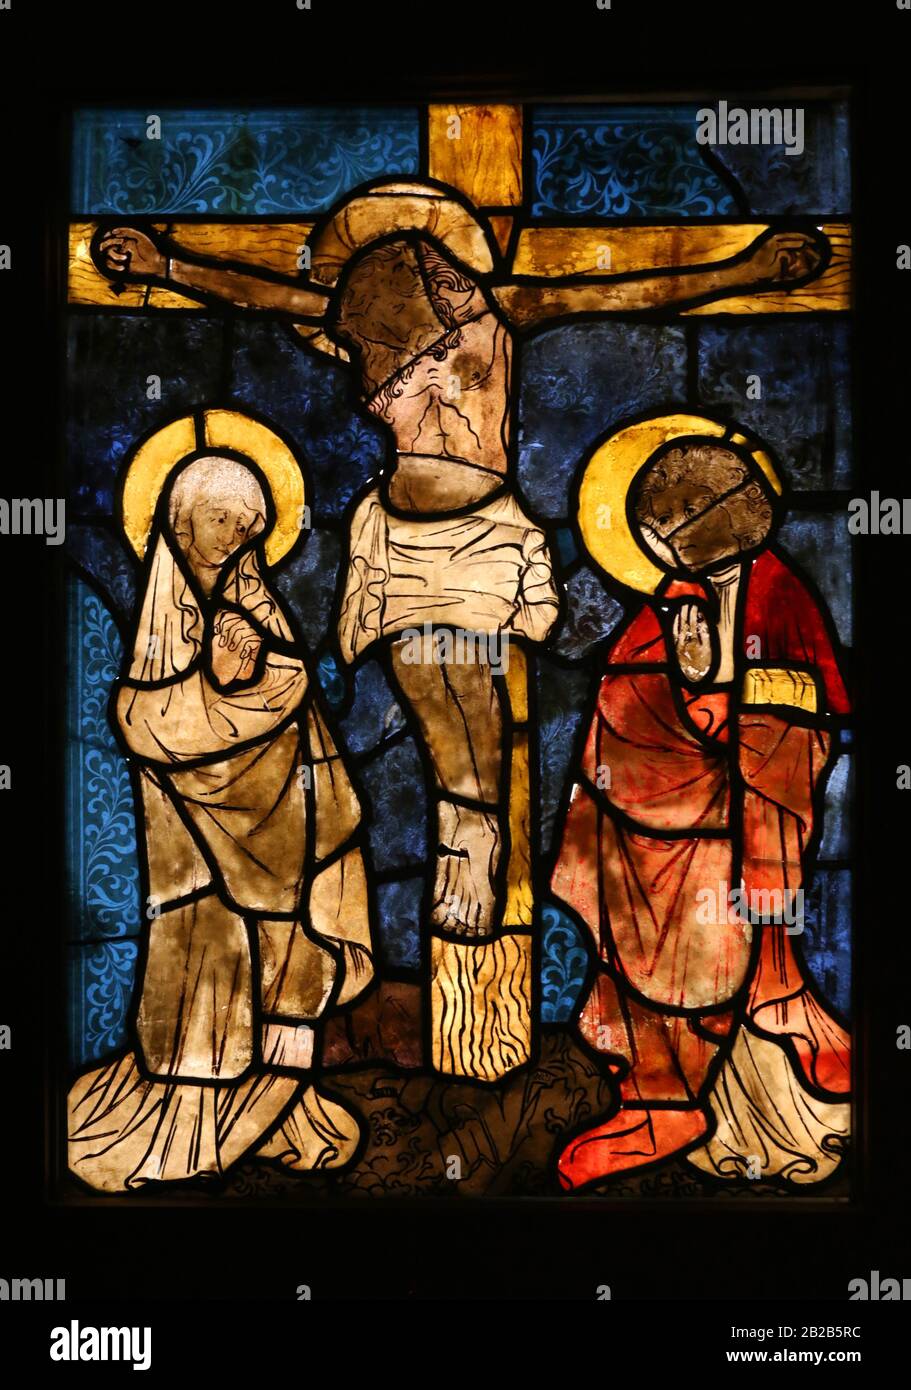 Cracow. Krakow. Poland. Medieval stained glass window. Crucifixion.  Ca. 1430. Cracow dominicans cloister. Stock Photo